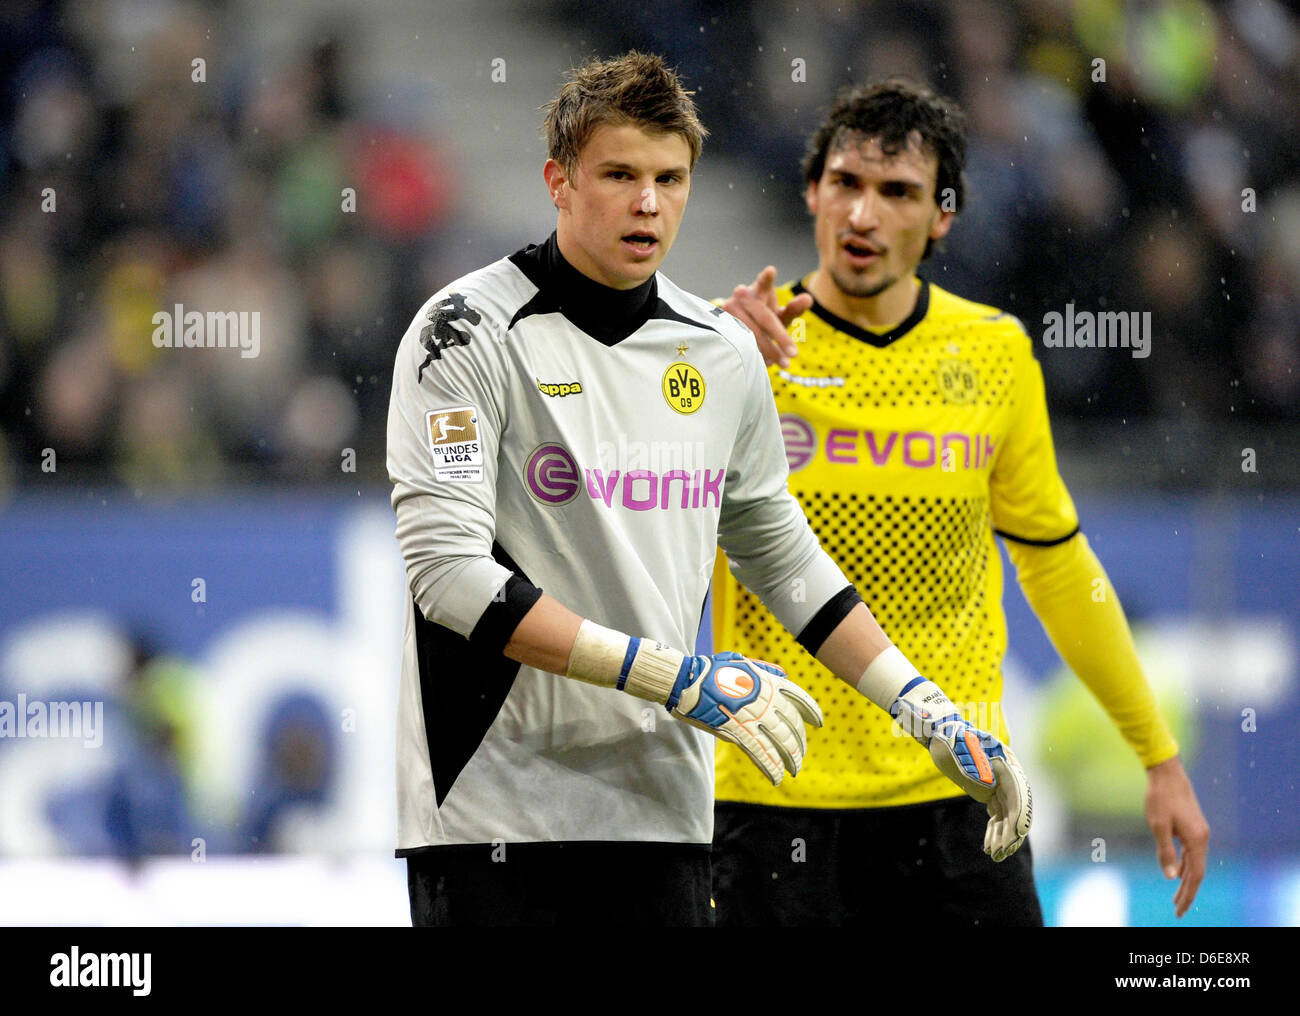 Dortmund's goalkeeper Mitchell Langerak stands next to team-mate Mats Hummels during the Bundesliga soccer match between Hamburger SV and Borussia Dortmundd at the Imtech Arena in Hamburg, Germany, 22 January 2012. Photo: MARCUS BRANDT (ATTENTION: EMBARGO CONDITIONS! The DFL permits the further utilisation of the pictures in IPTV, mobile services and other new technologies only no  Stock Photo